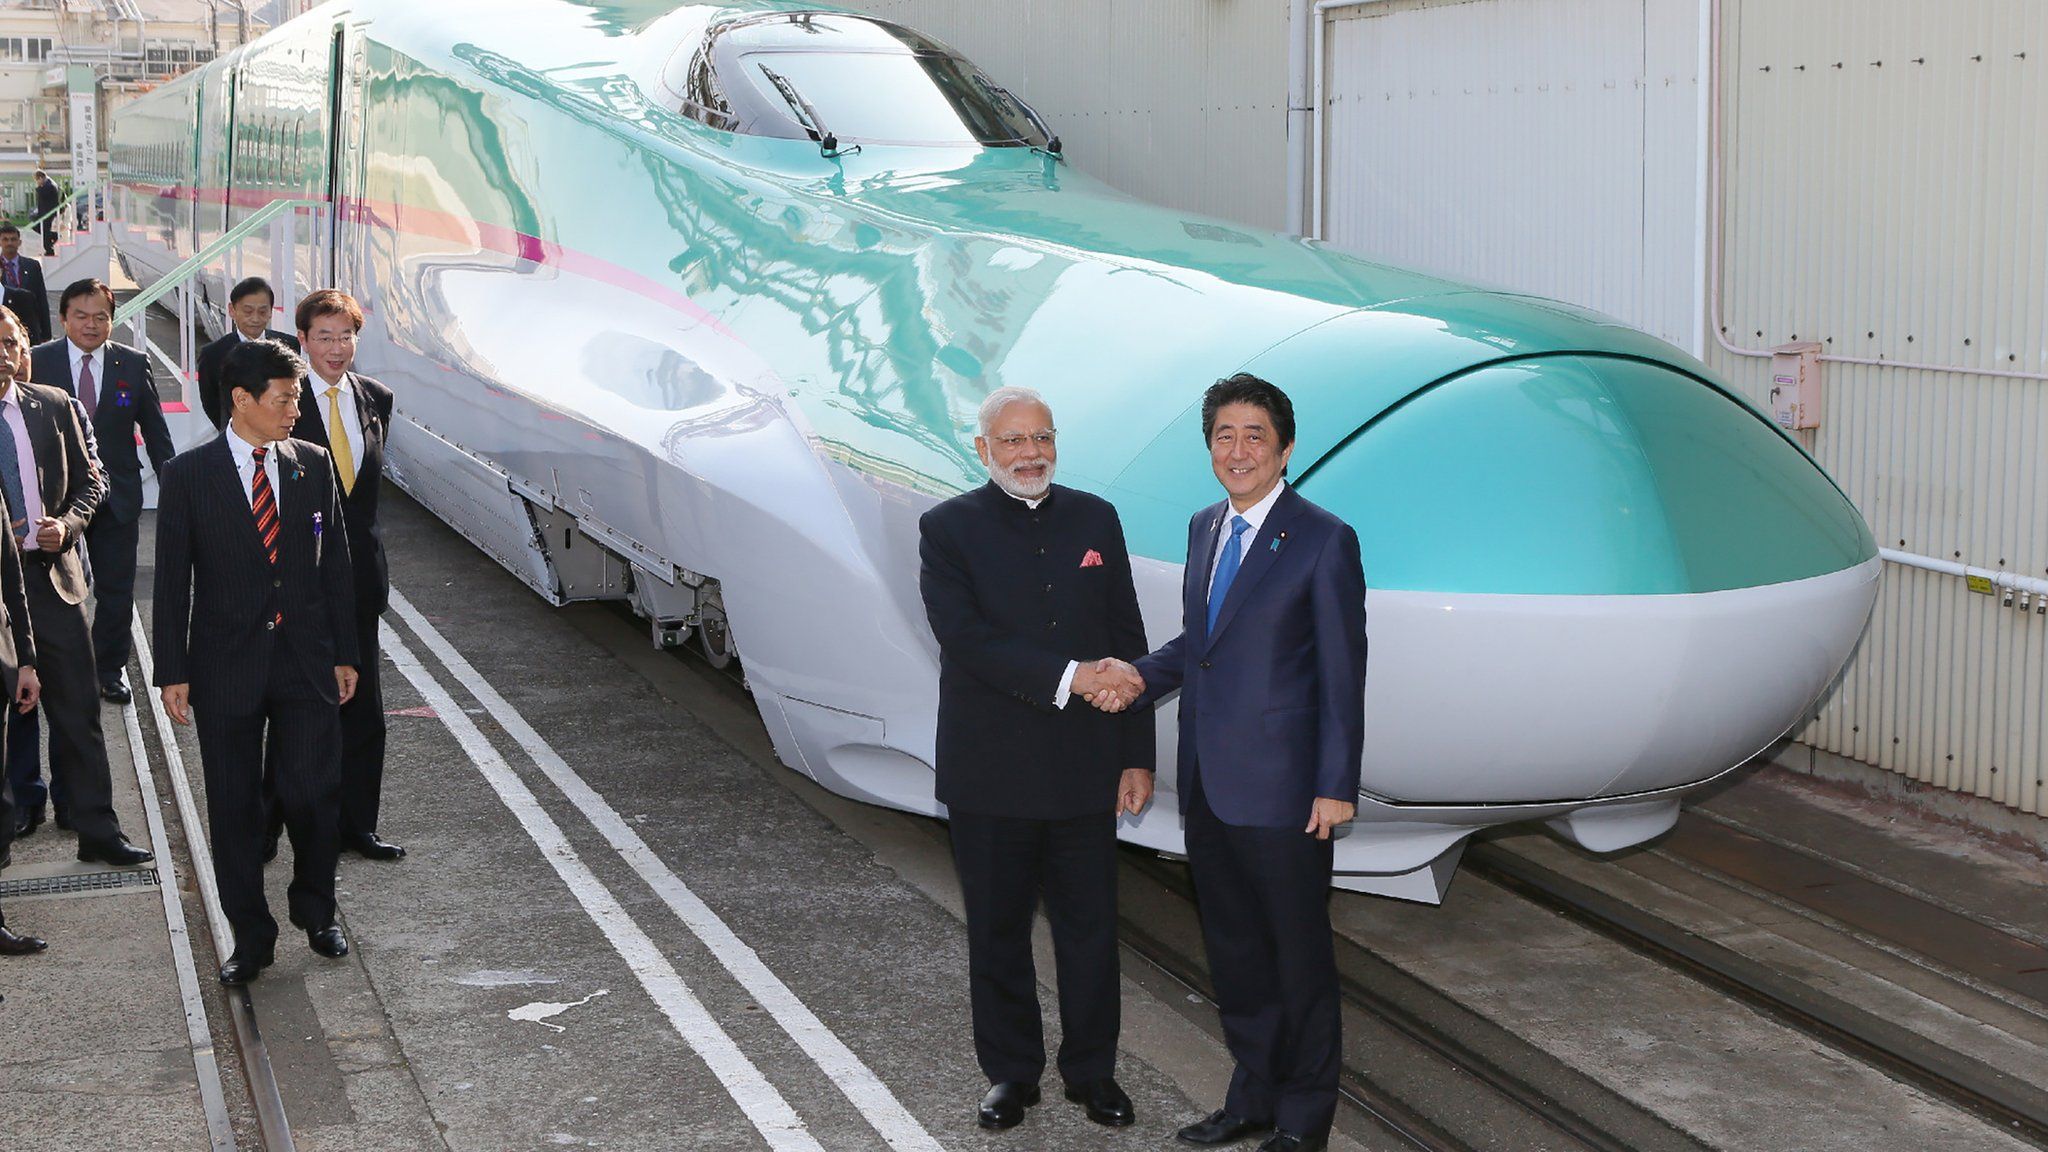 Bullet Train Project: Bids invited for construction of BKC underground station by NHSRCL